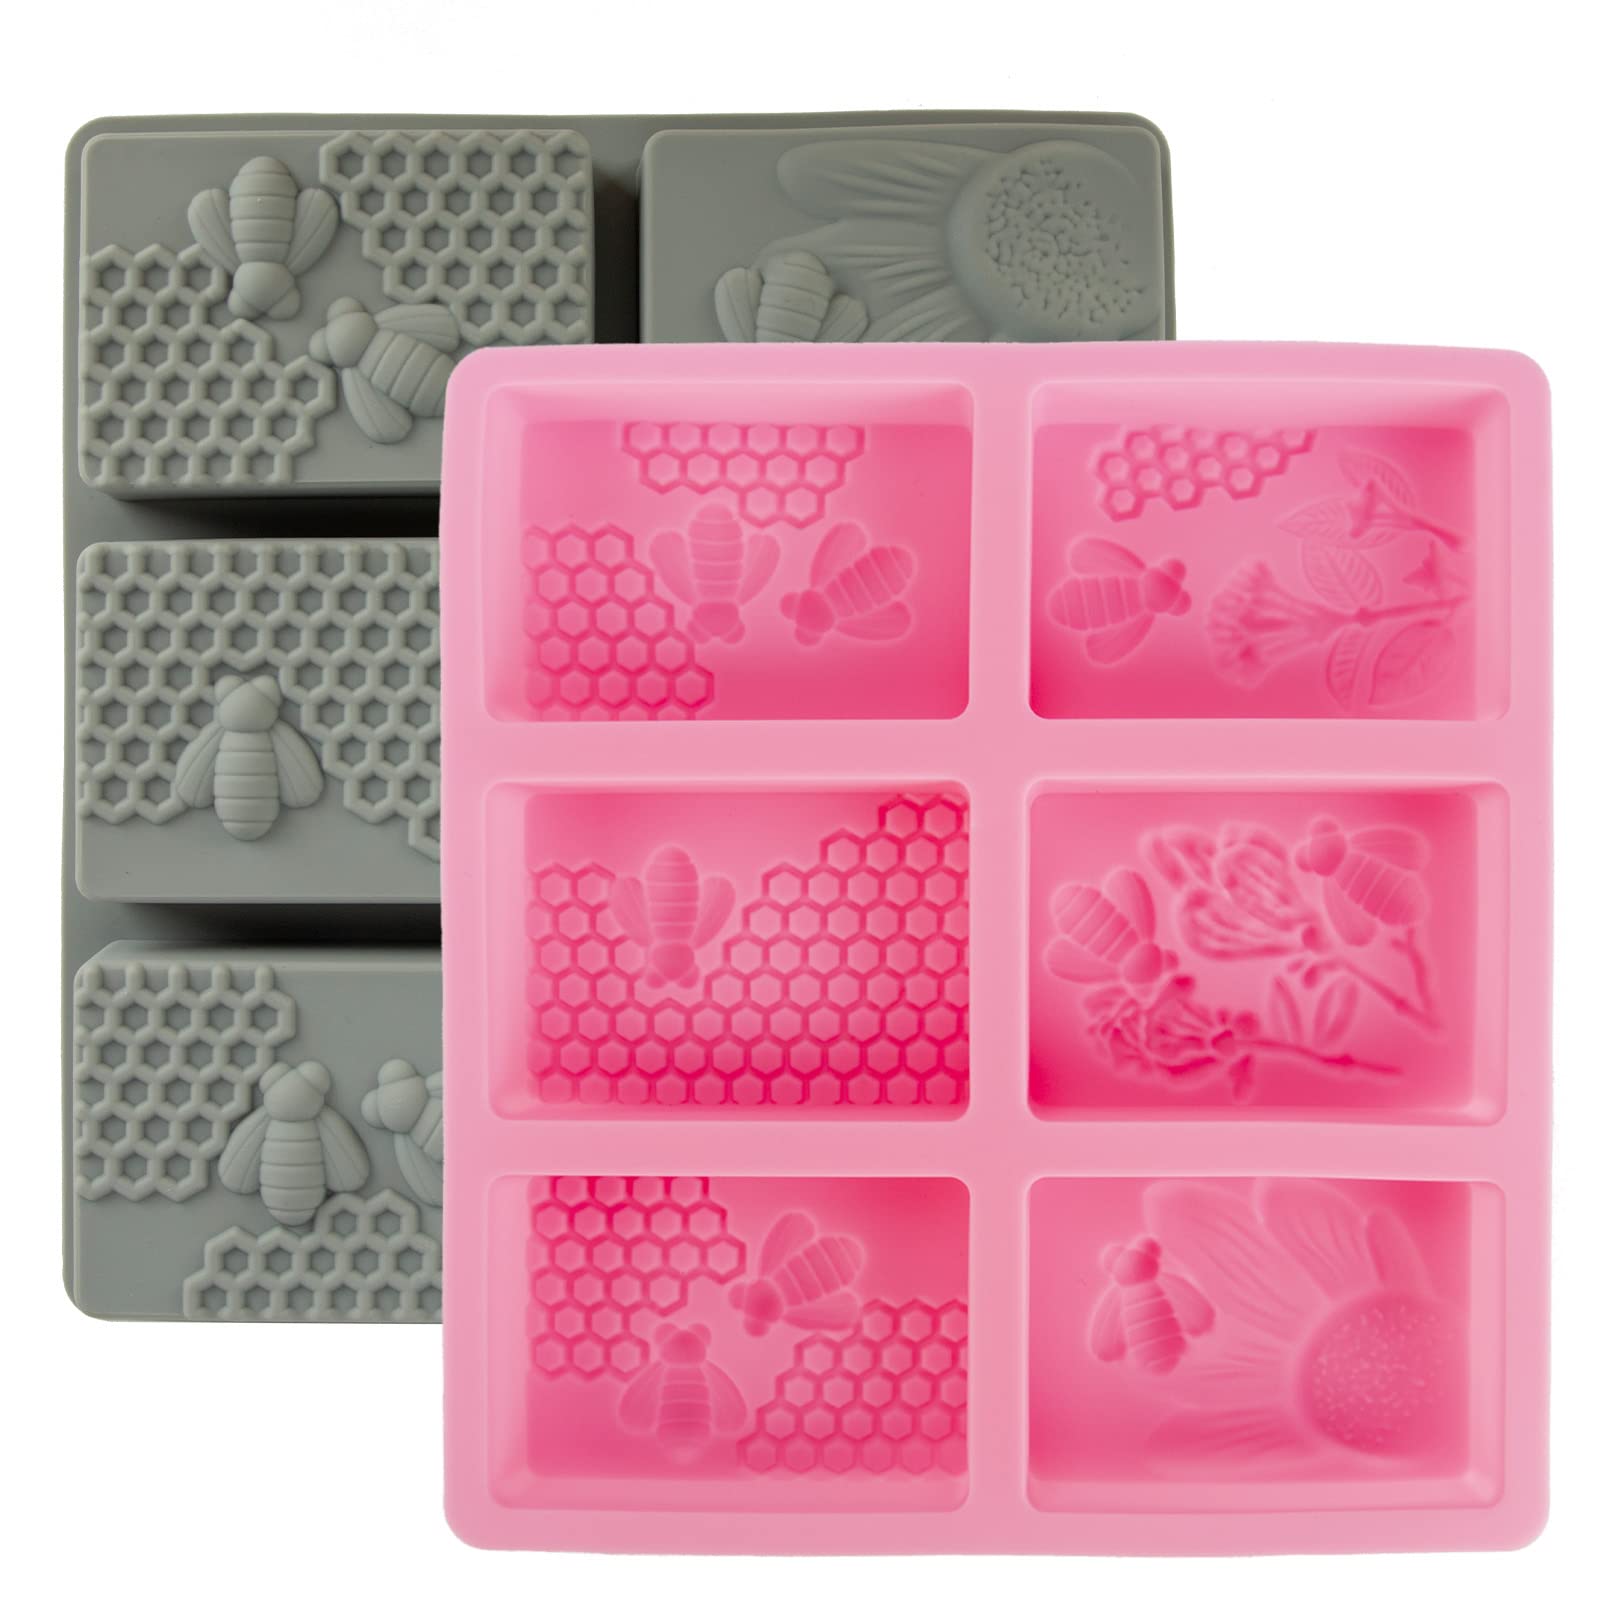 Honeycomb Shape Silicone Ice Cube Molds Icing Silicone Mold Honey Soap  Molds Silicone Molds Soap Mold Baking Pan 19 Cavities Multipurpose Soap  Molds F